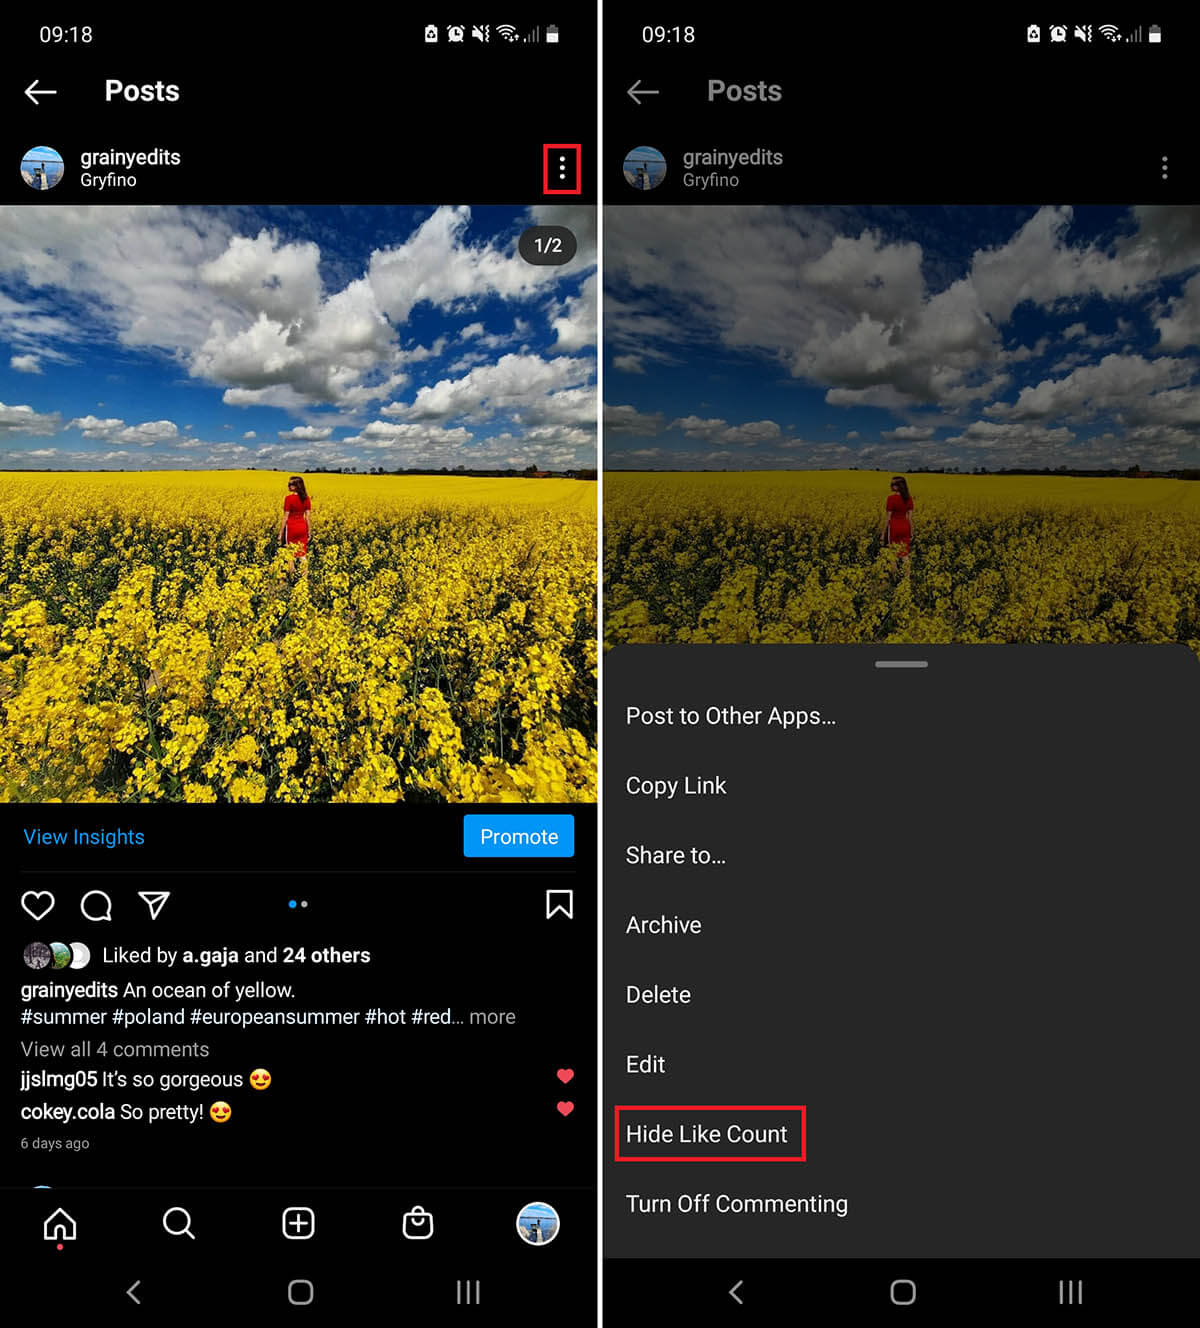 how to hide likes on old posts in instagram